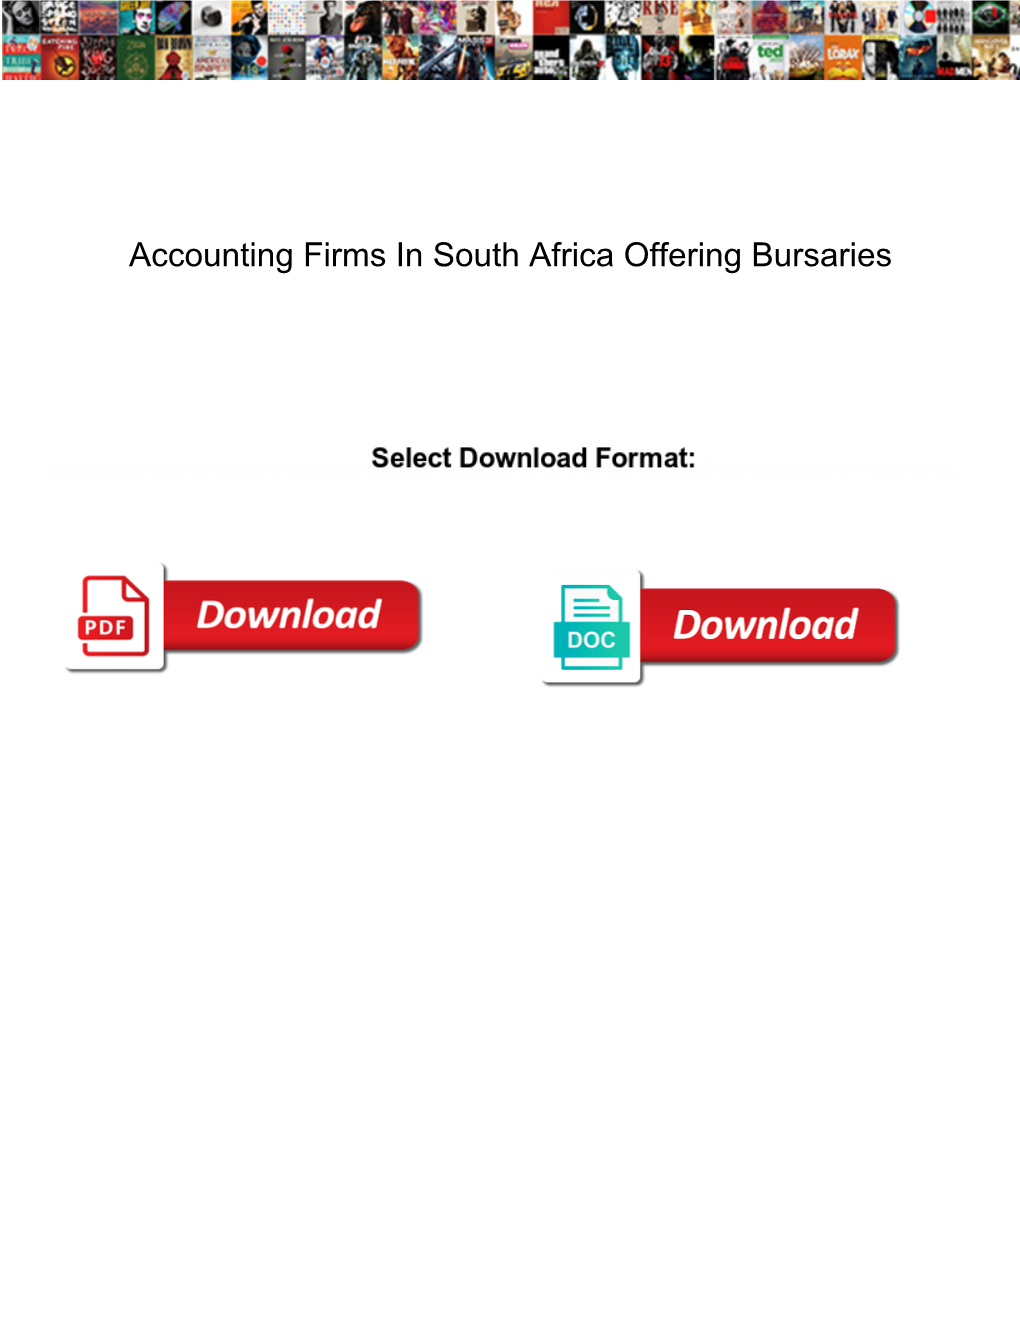 Accounting Firms in South Africa Offering Bursaries